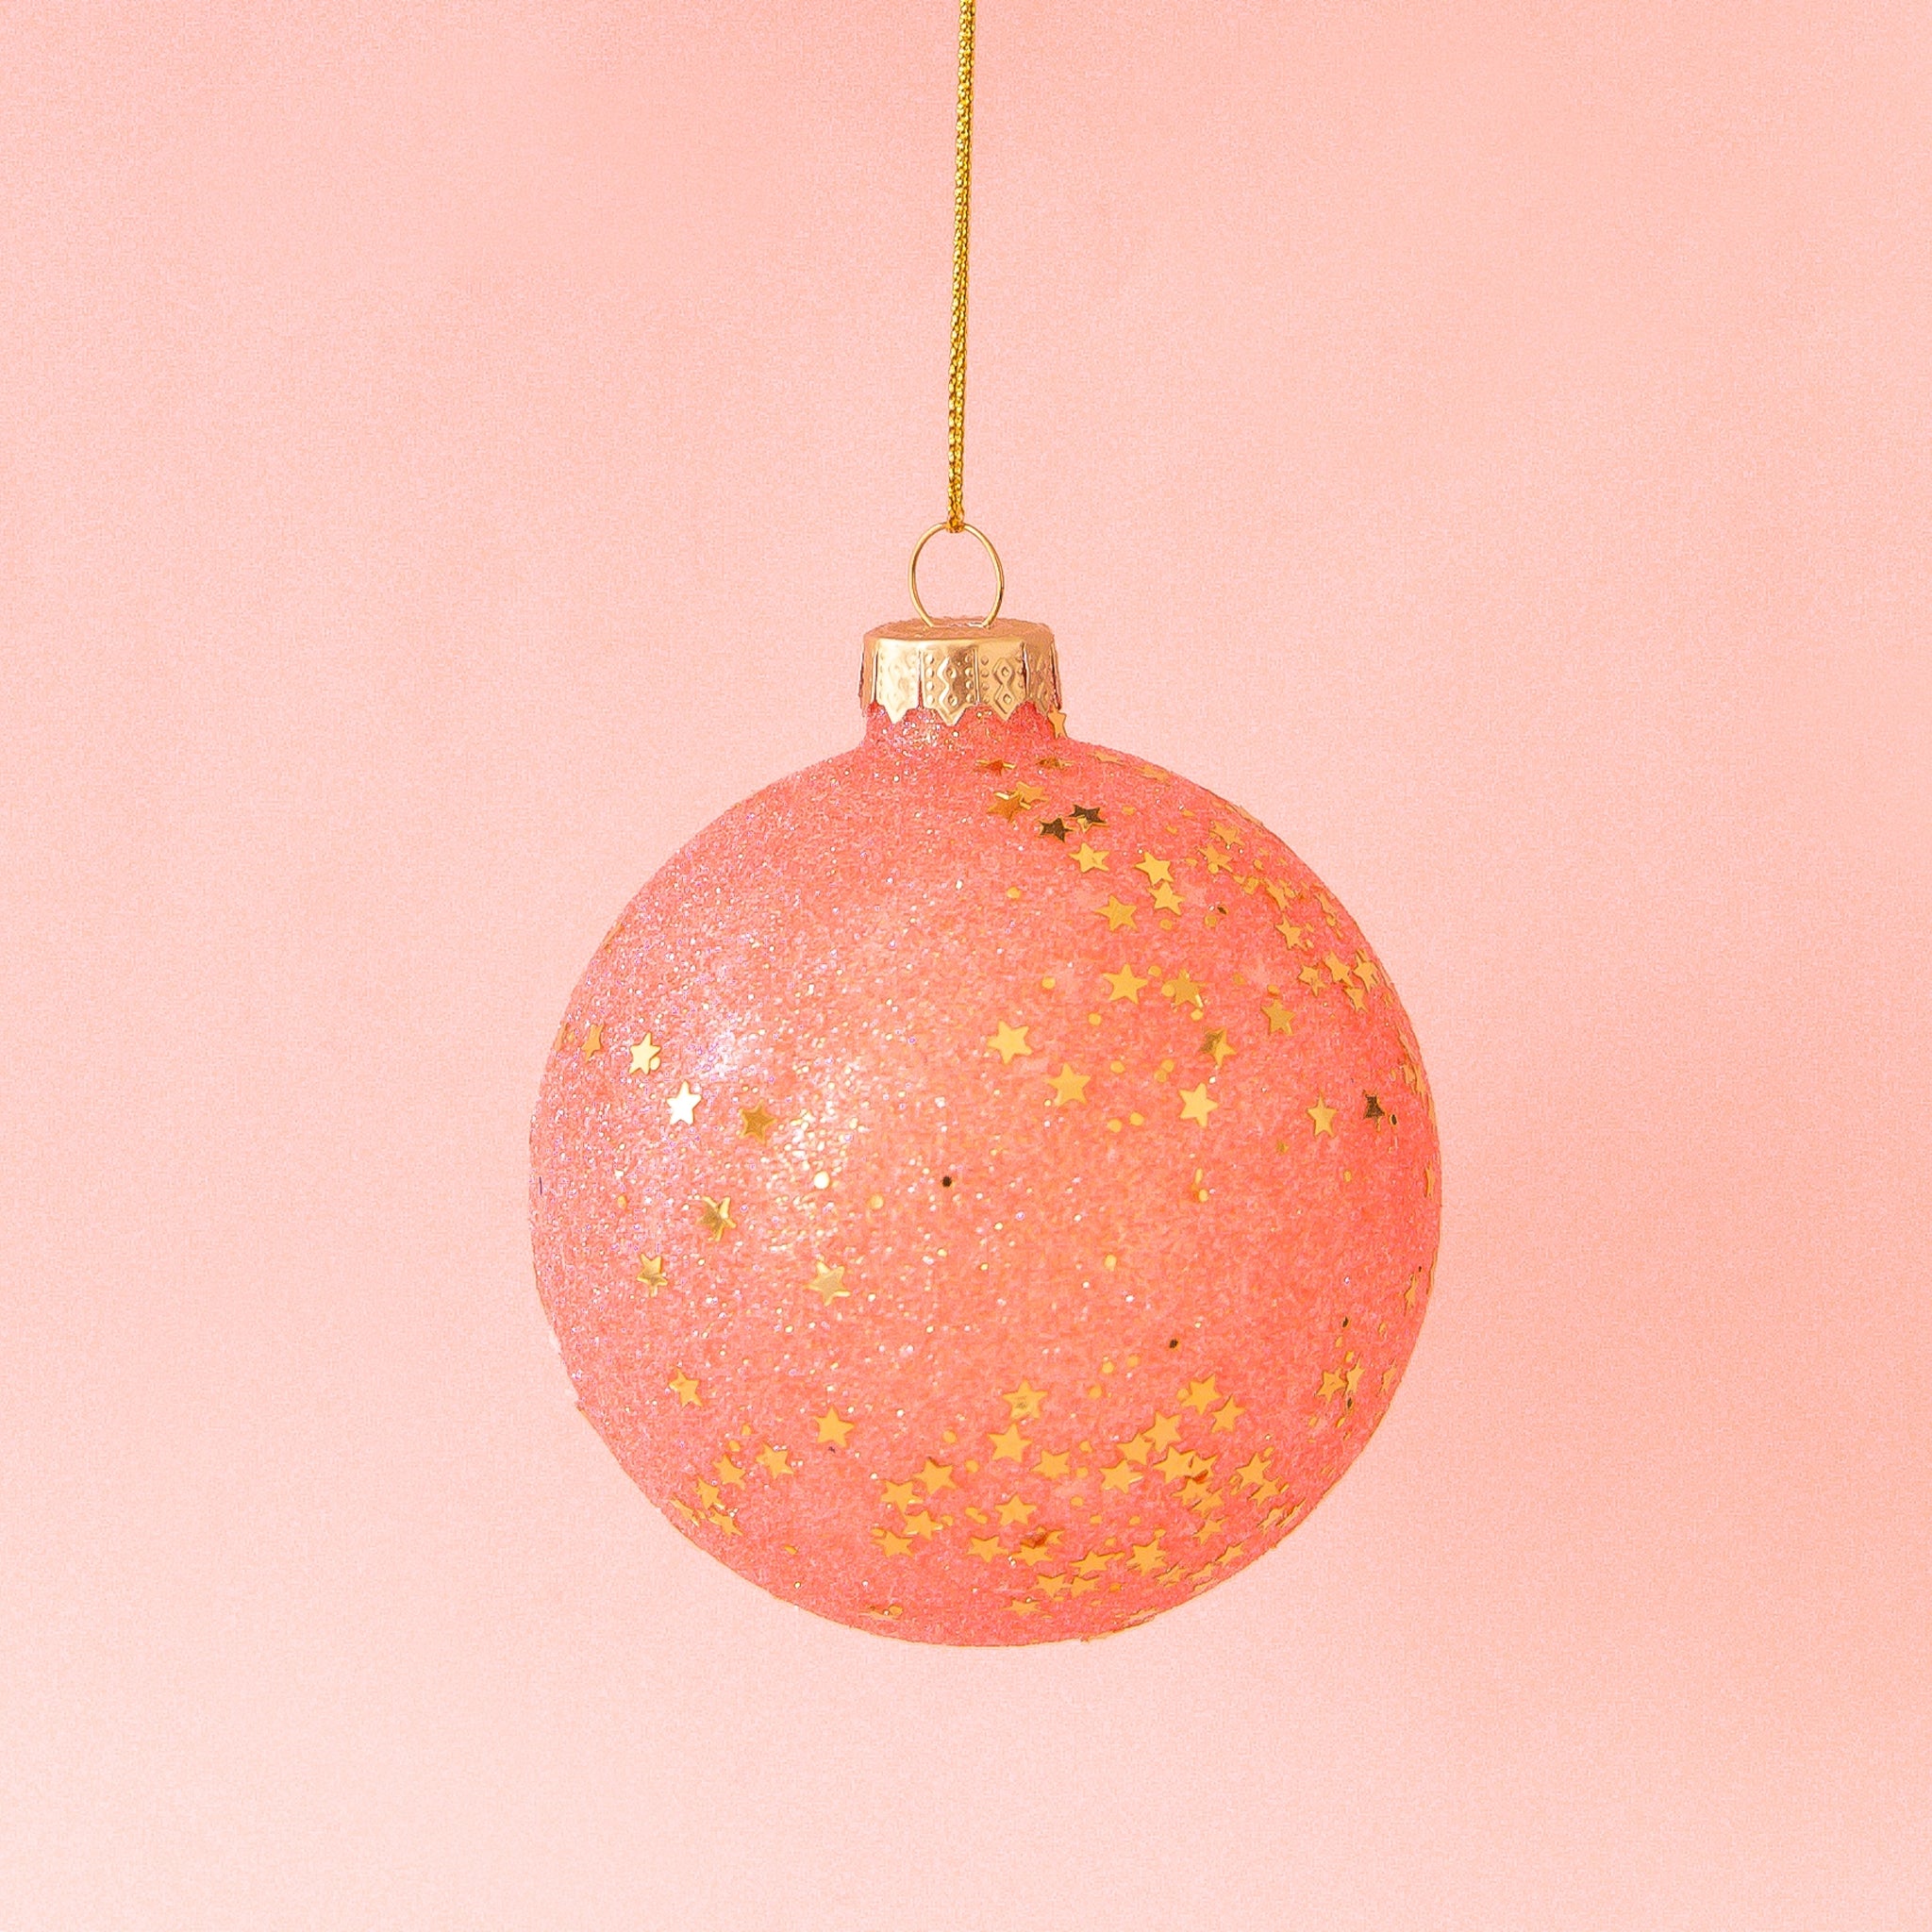 On a pink background is a watermelon colored glass ball ornament with a gold sparkle and star detail.